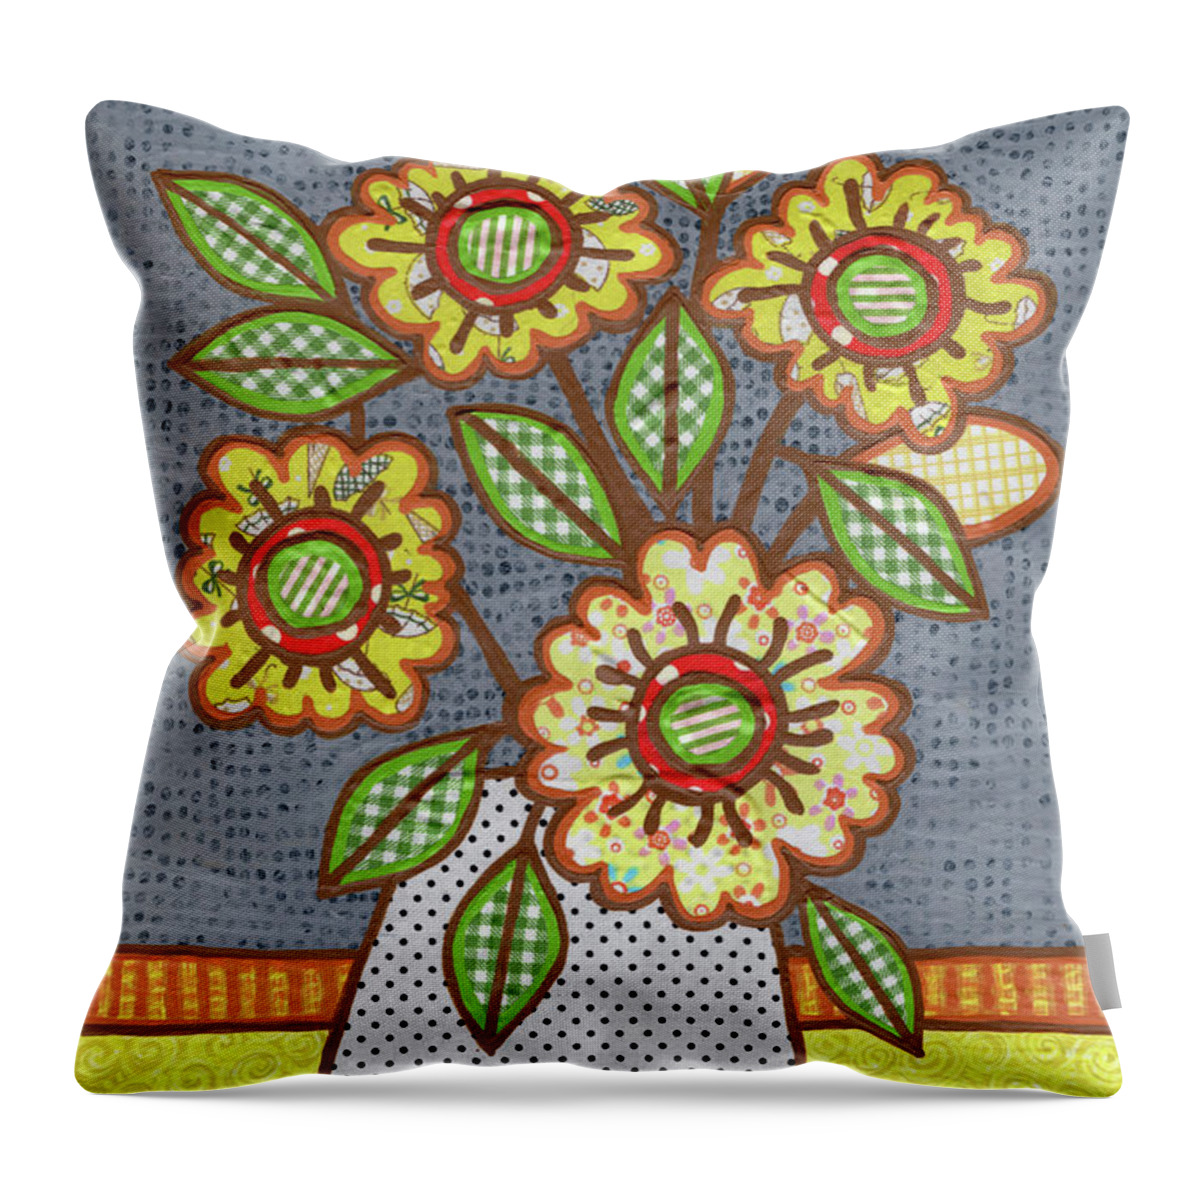 Flowers In A Vase Throw Pillow featuring the painting Summertime Bouquet by Amy E Fraser